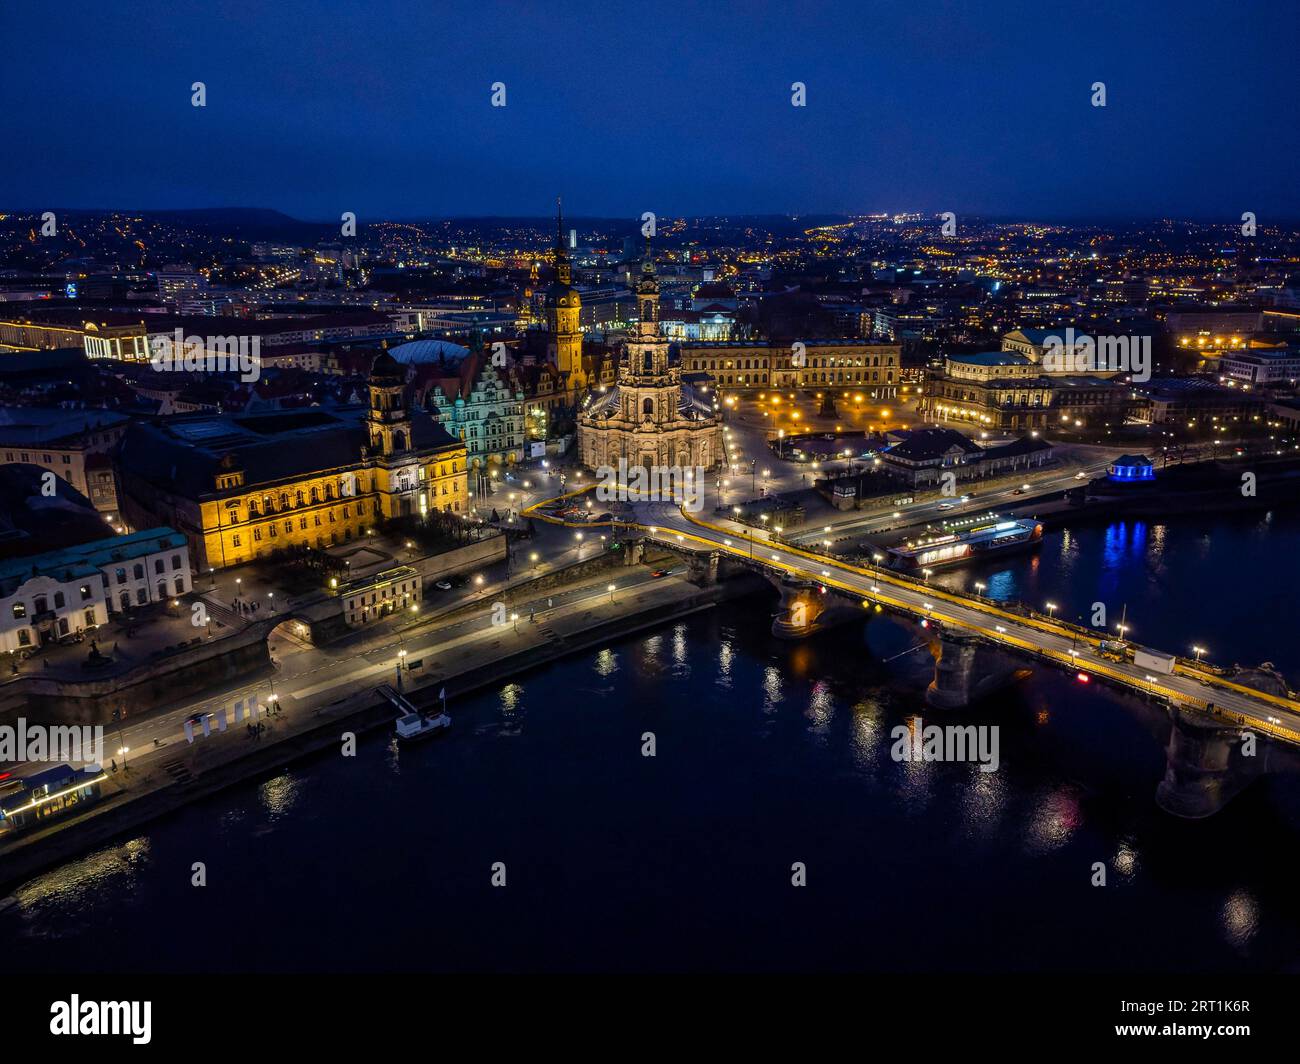 Terrace bank, Augustus Bridge, Court Church, George Gate, Residence Palace, Zwinger and Semper Opera House by night Stock Photo